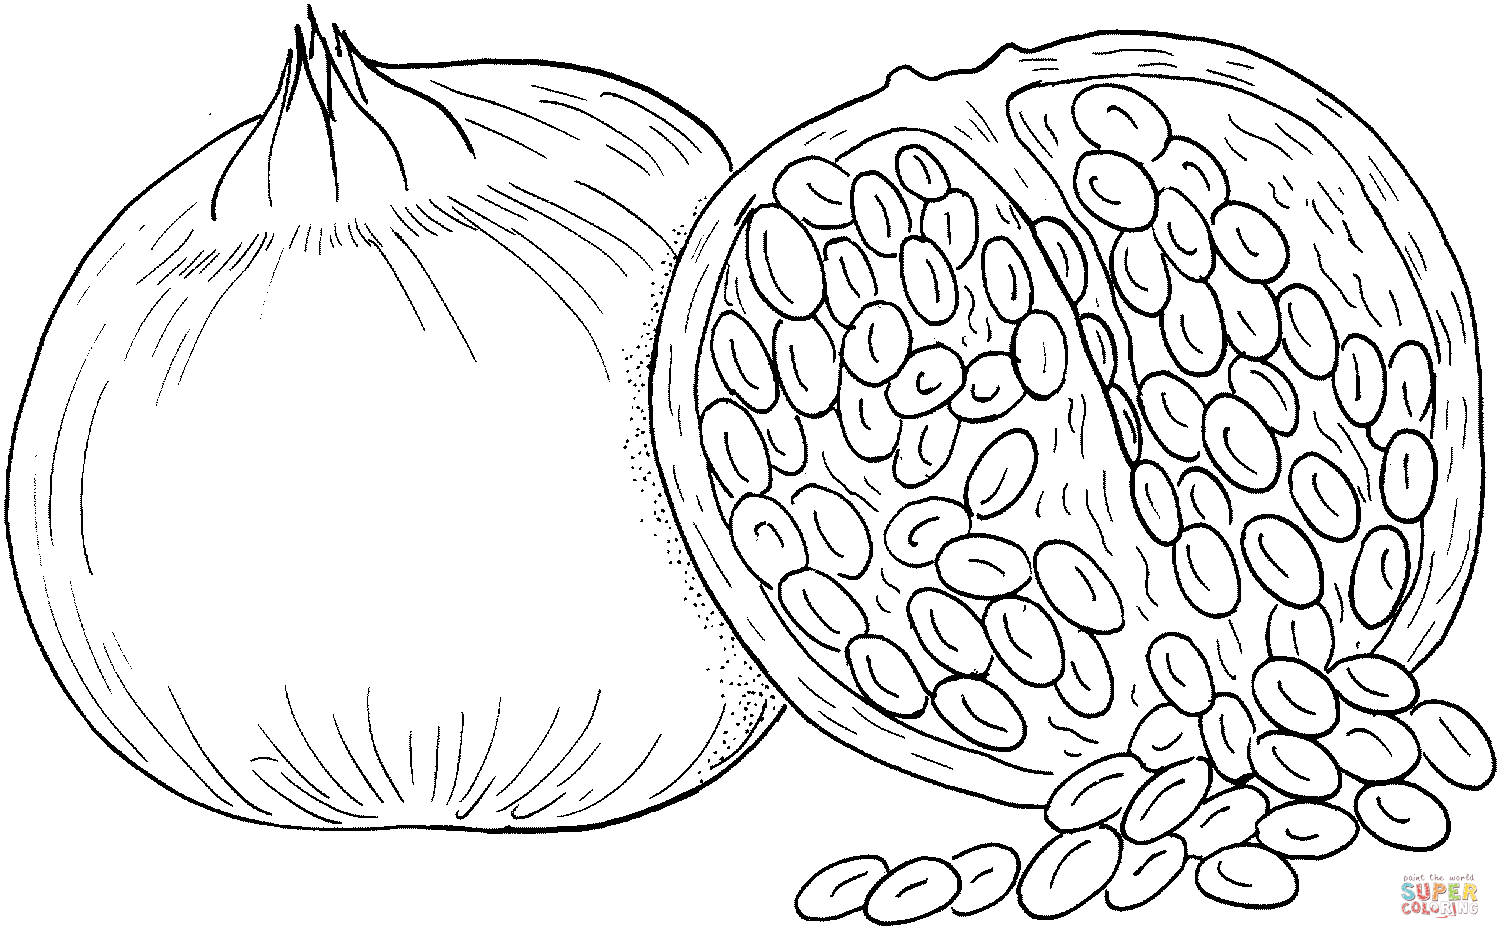 Pomegranate 2 coloring page | Free Printable Coloring Pages